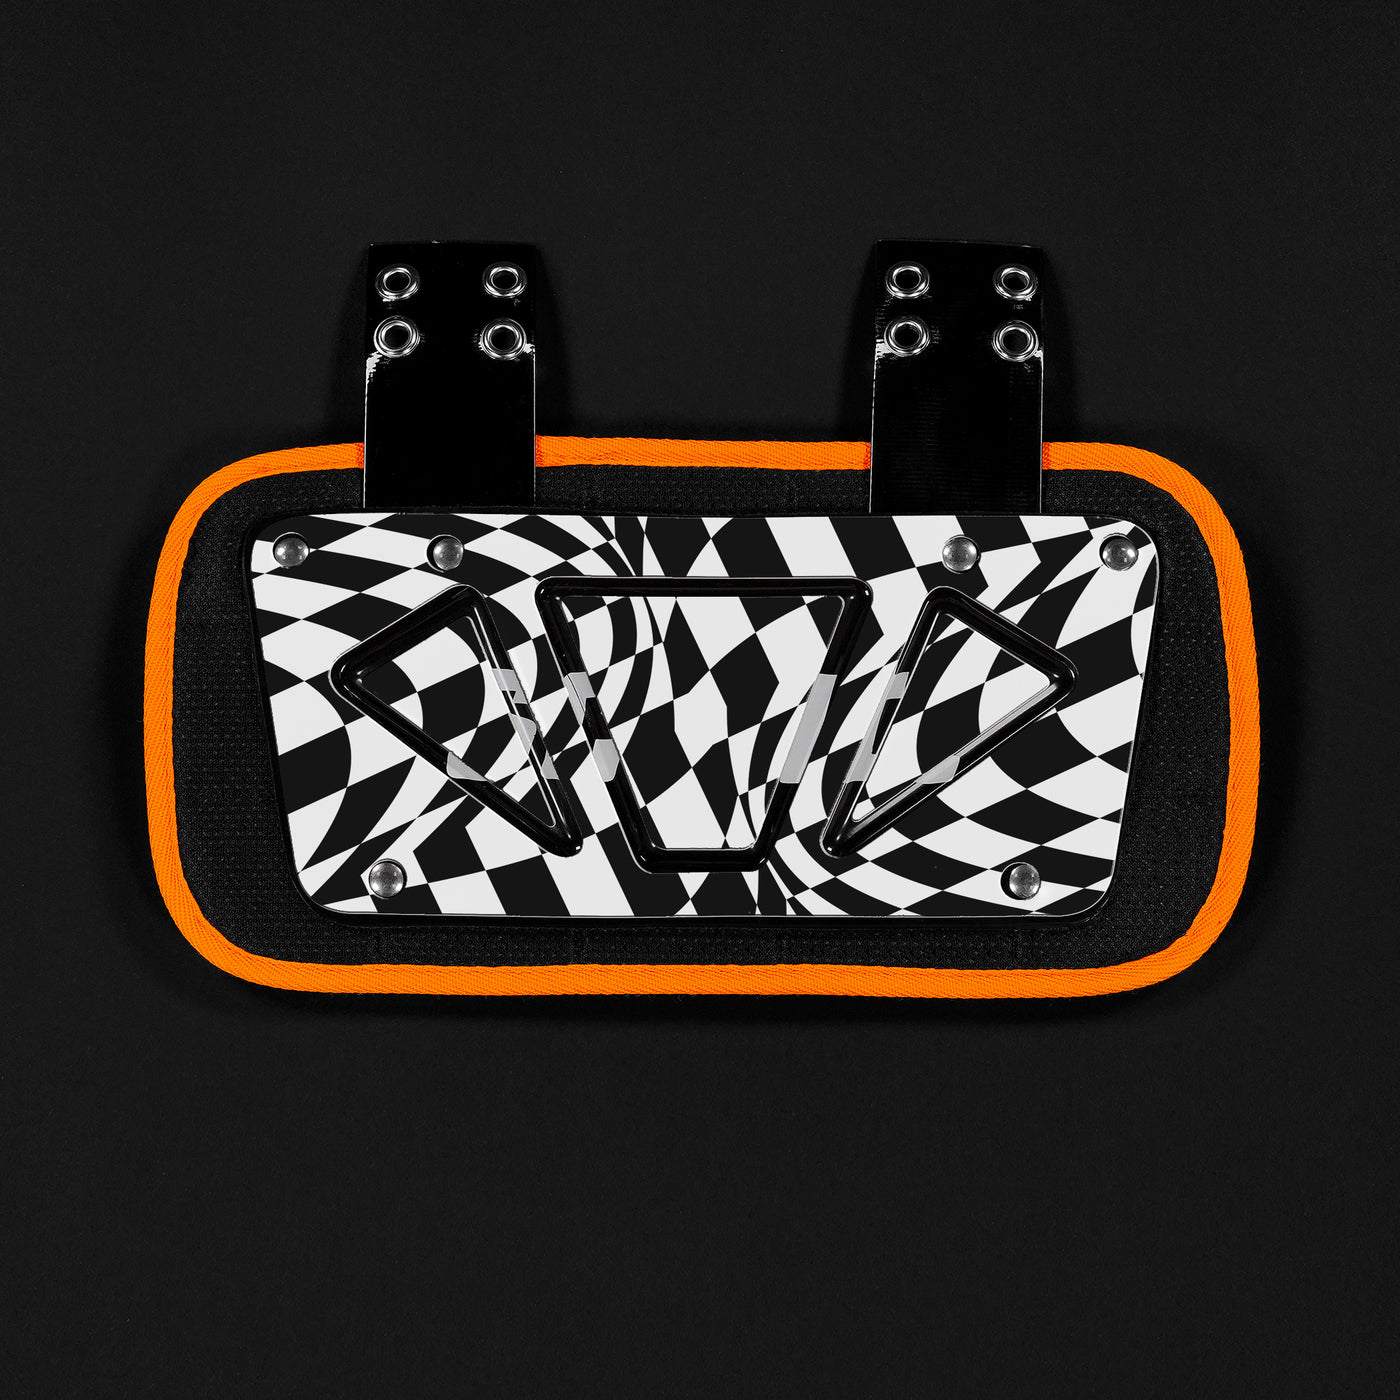 Warped Checkered Sticker for Back Plate